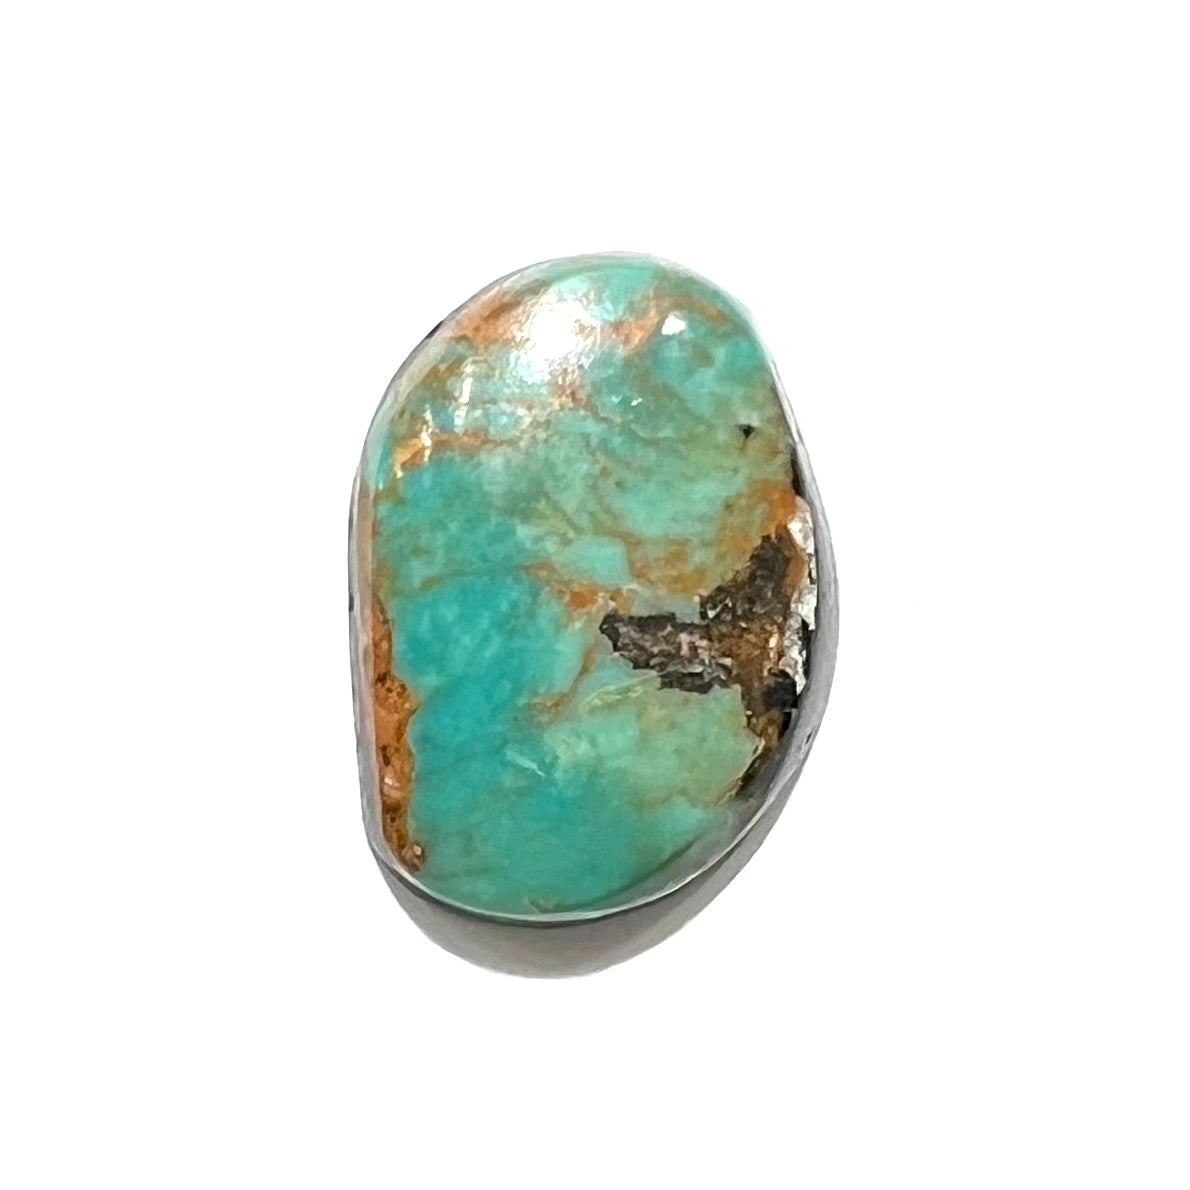 A loose, greenish blue Royston turquoise stone from Nevada.  The stone has brown and black matrix.